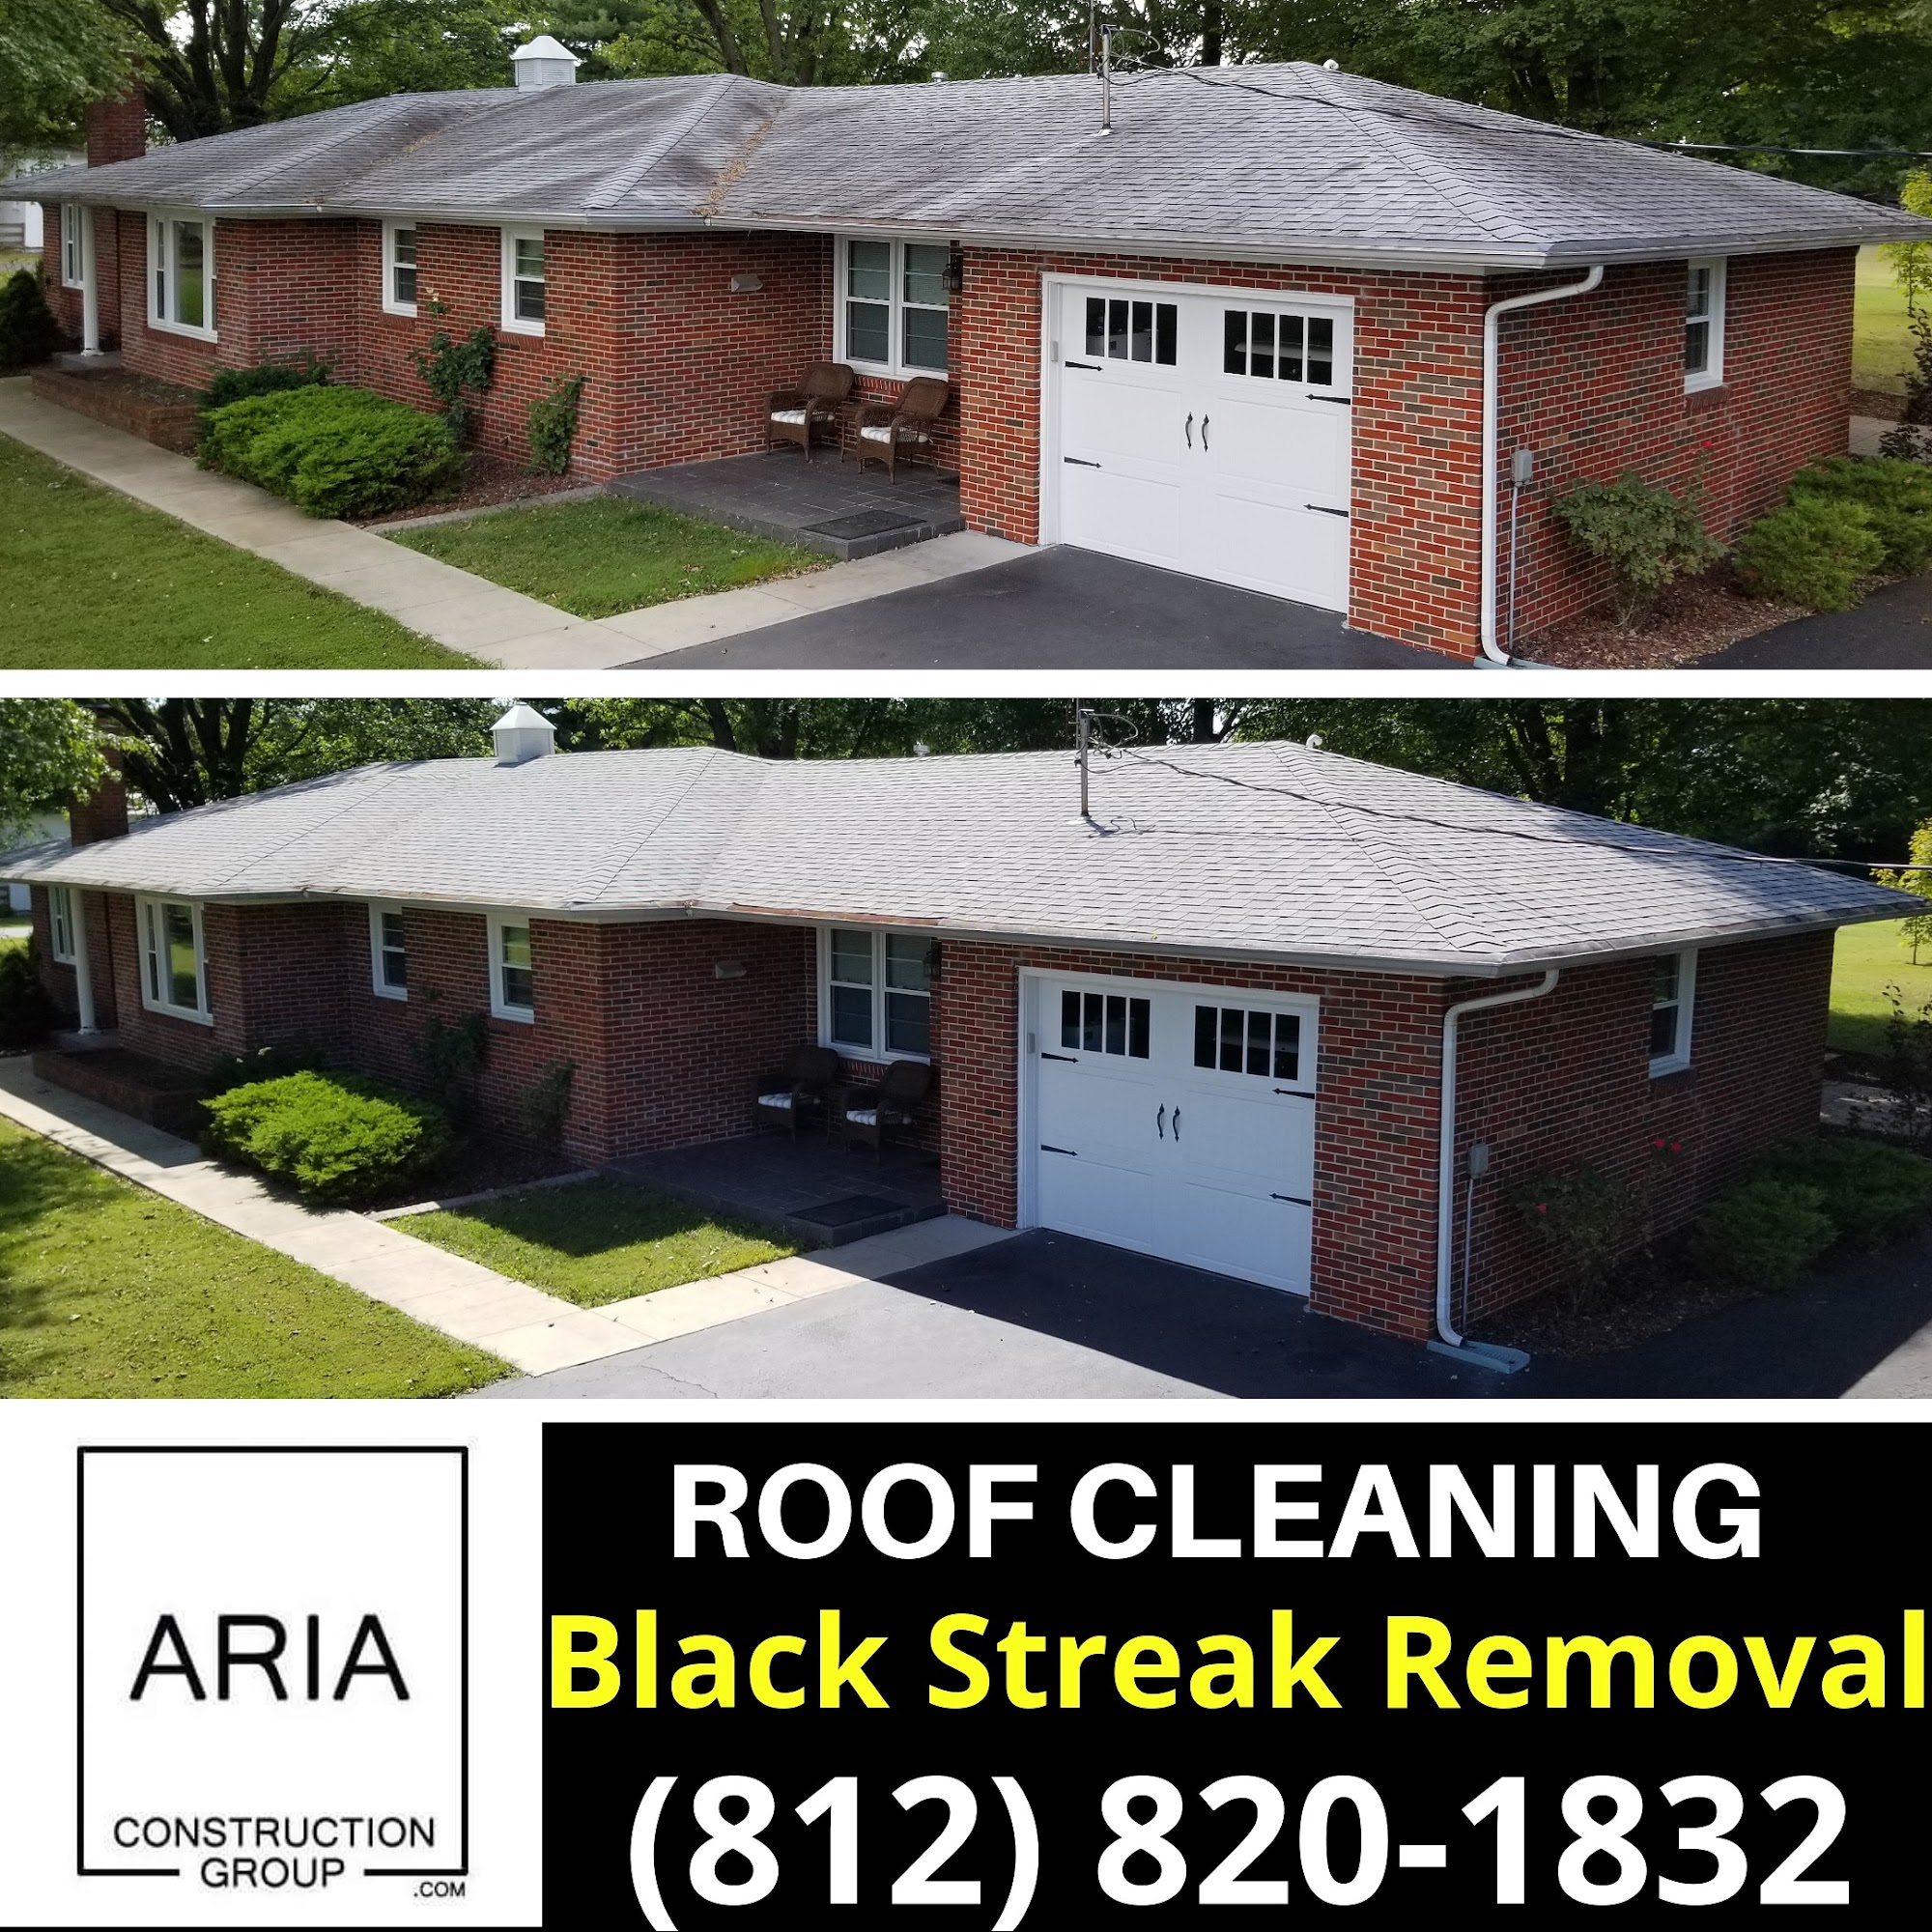 Aria Construction Group 1445 IN-56 #2, Scottsburg Indiana 47170